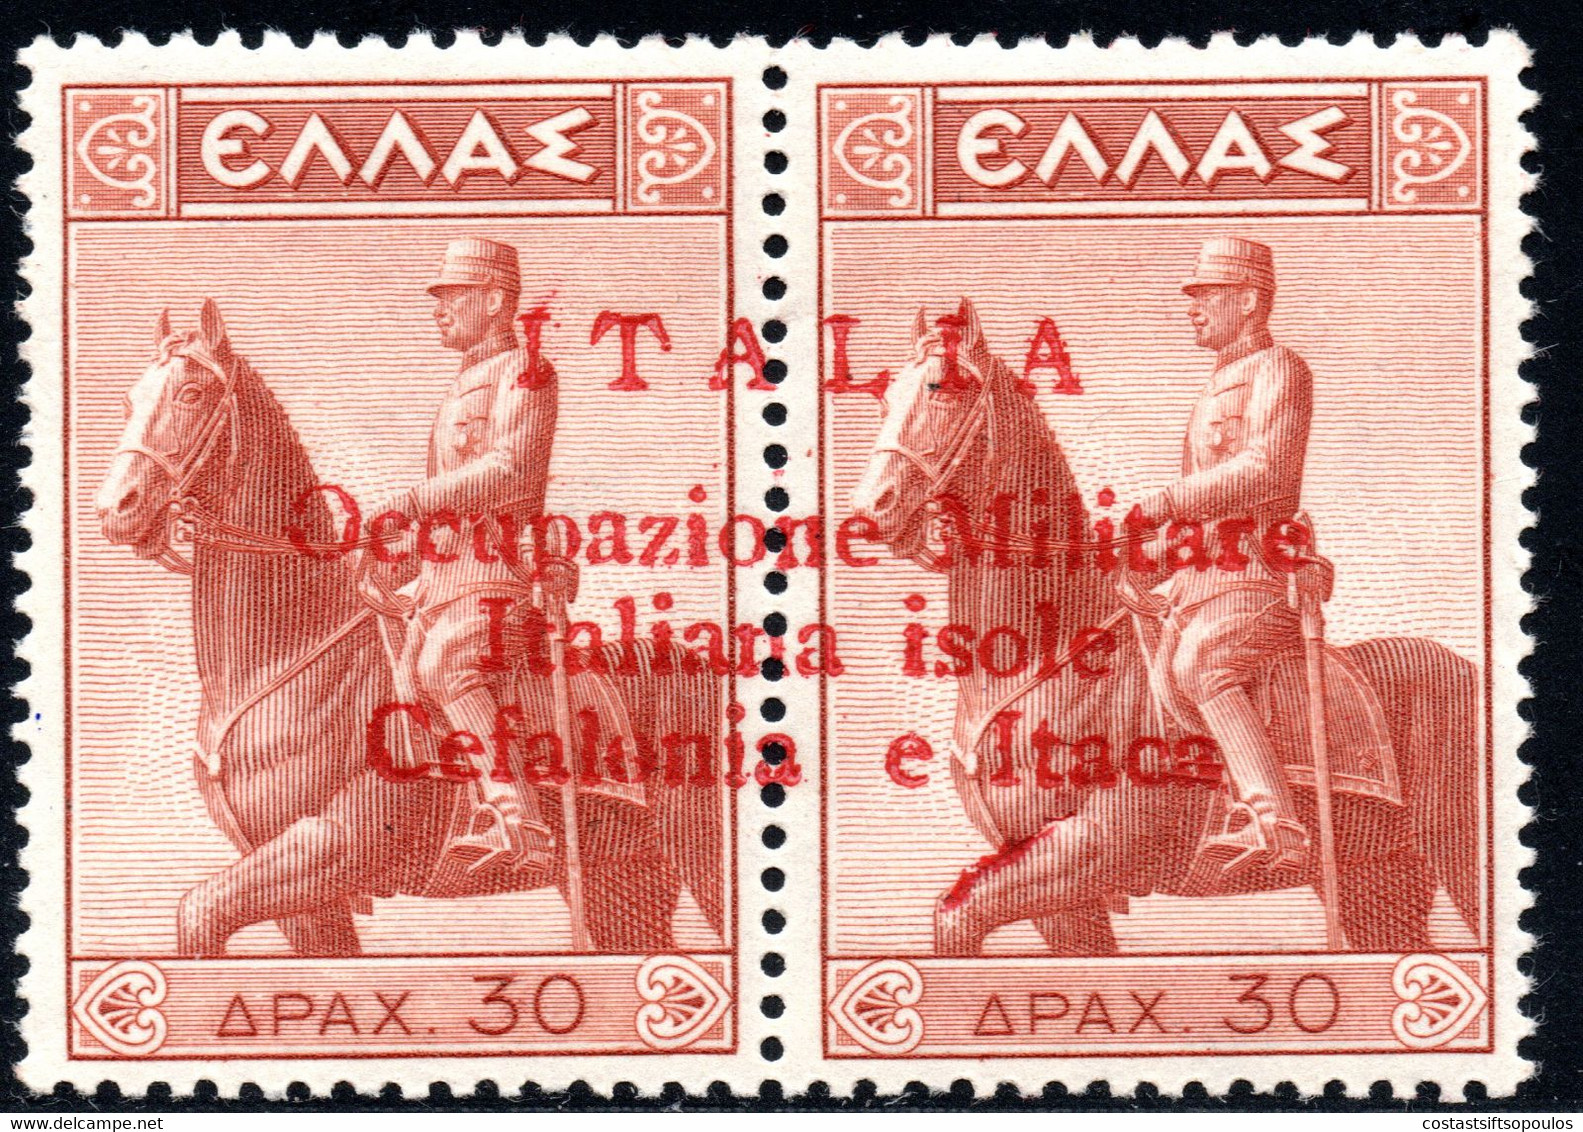 165.GREECE,ITALY,IONIAN,CEFALONIA,1941 30DR.RIDER,RED OVERPRINT???,MNH,POSSIBLY PRIVATE - Ionische Eilanden